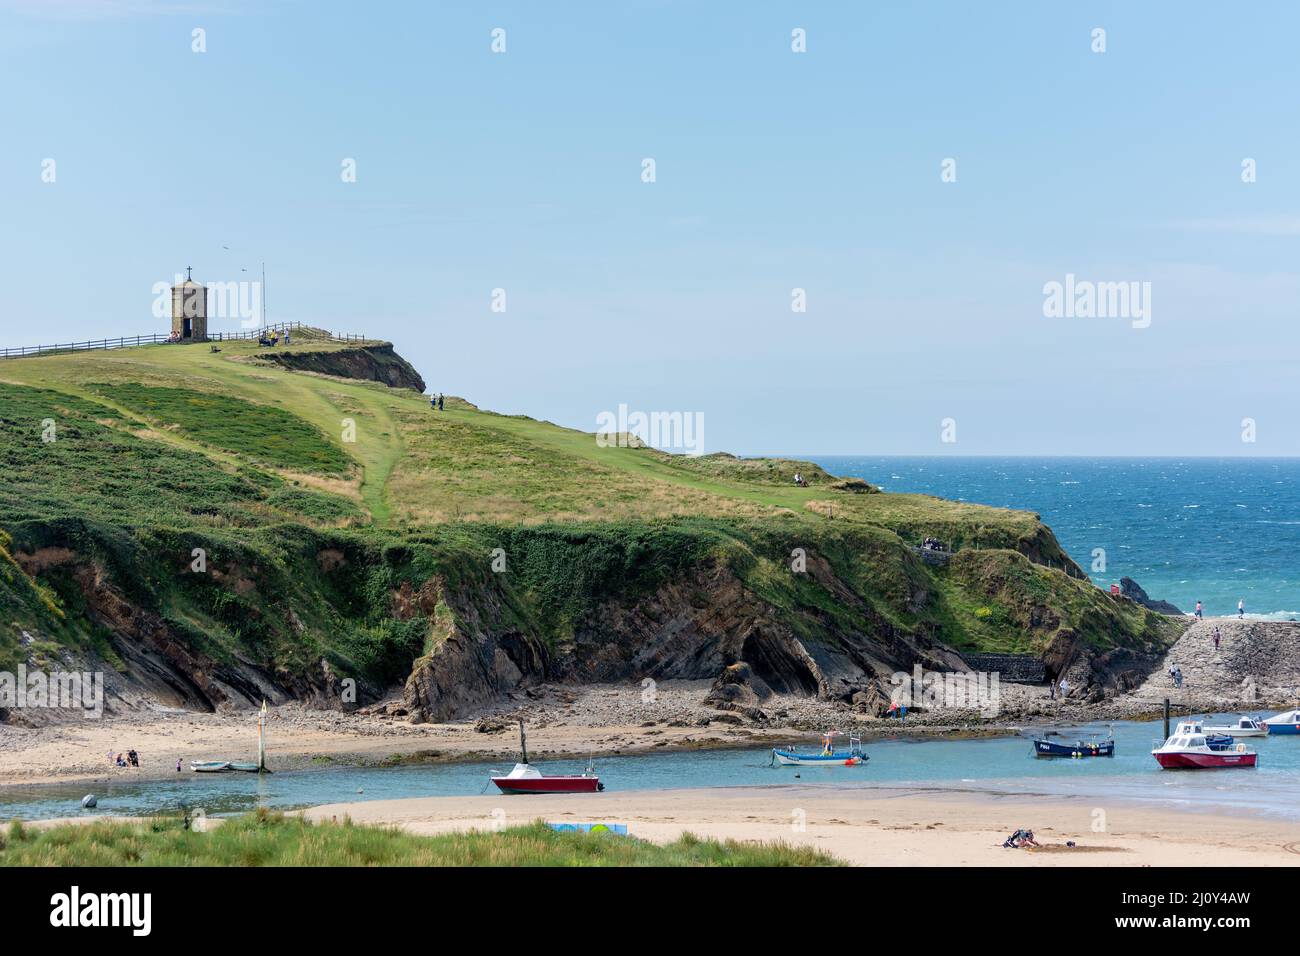 BUDE, CORNWALL/UK - AUGUST 15 : Beach and harbour in Bude in Cornwall on August 15, 2013. Unidentified people. Stock Photo